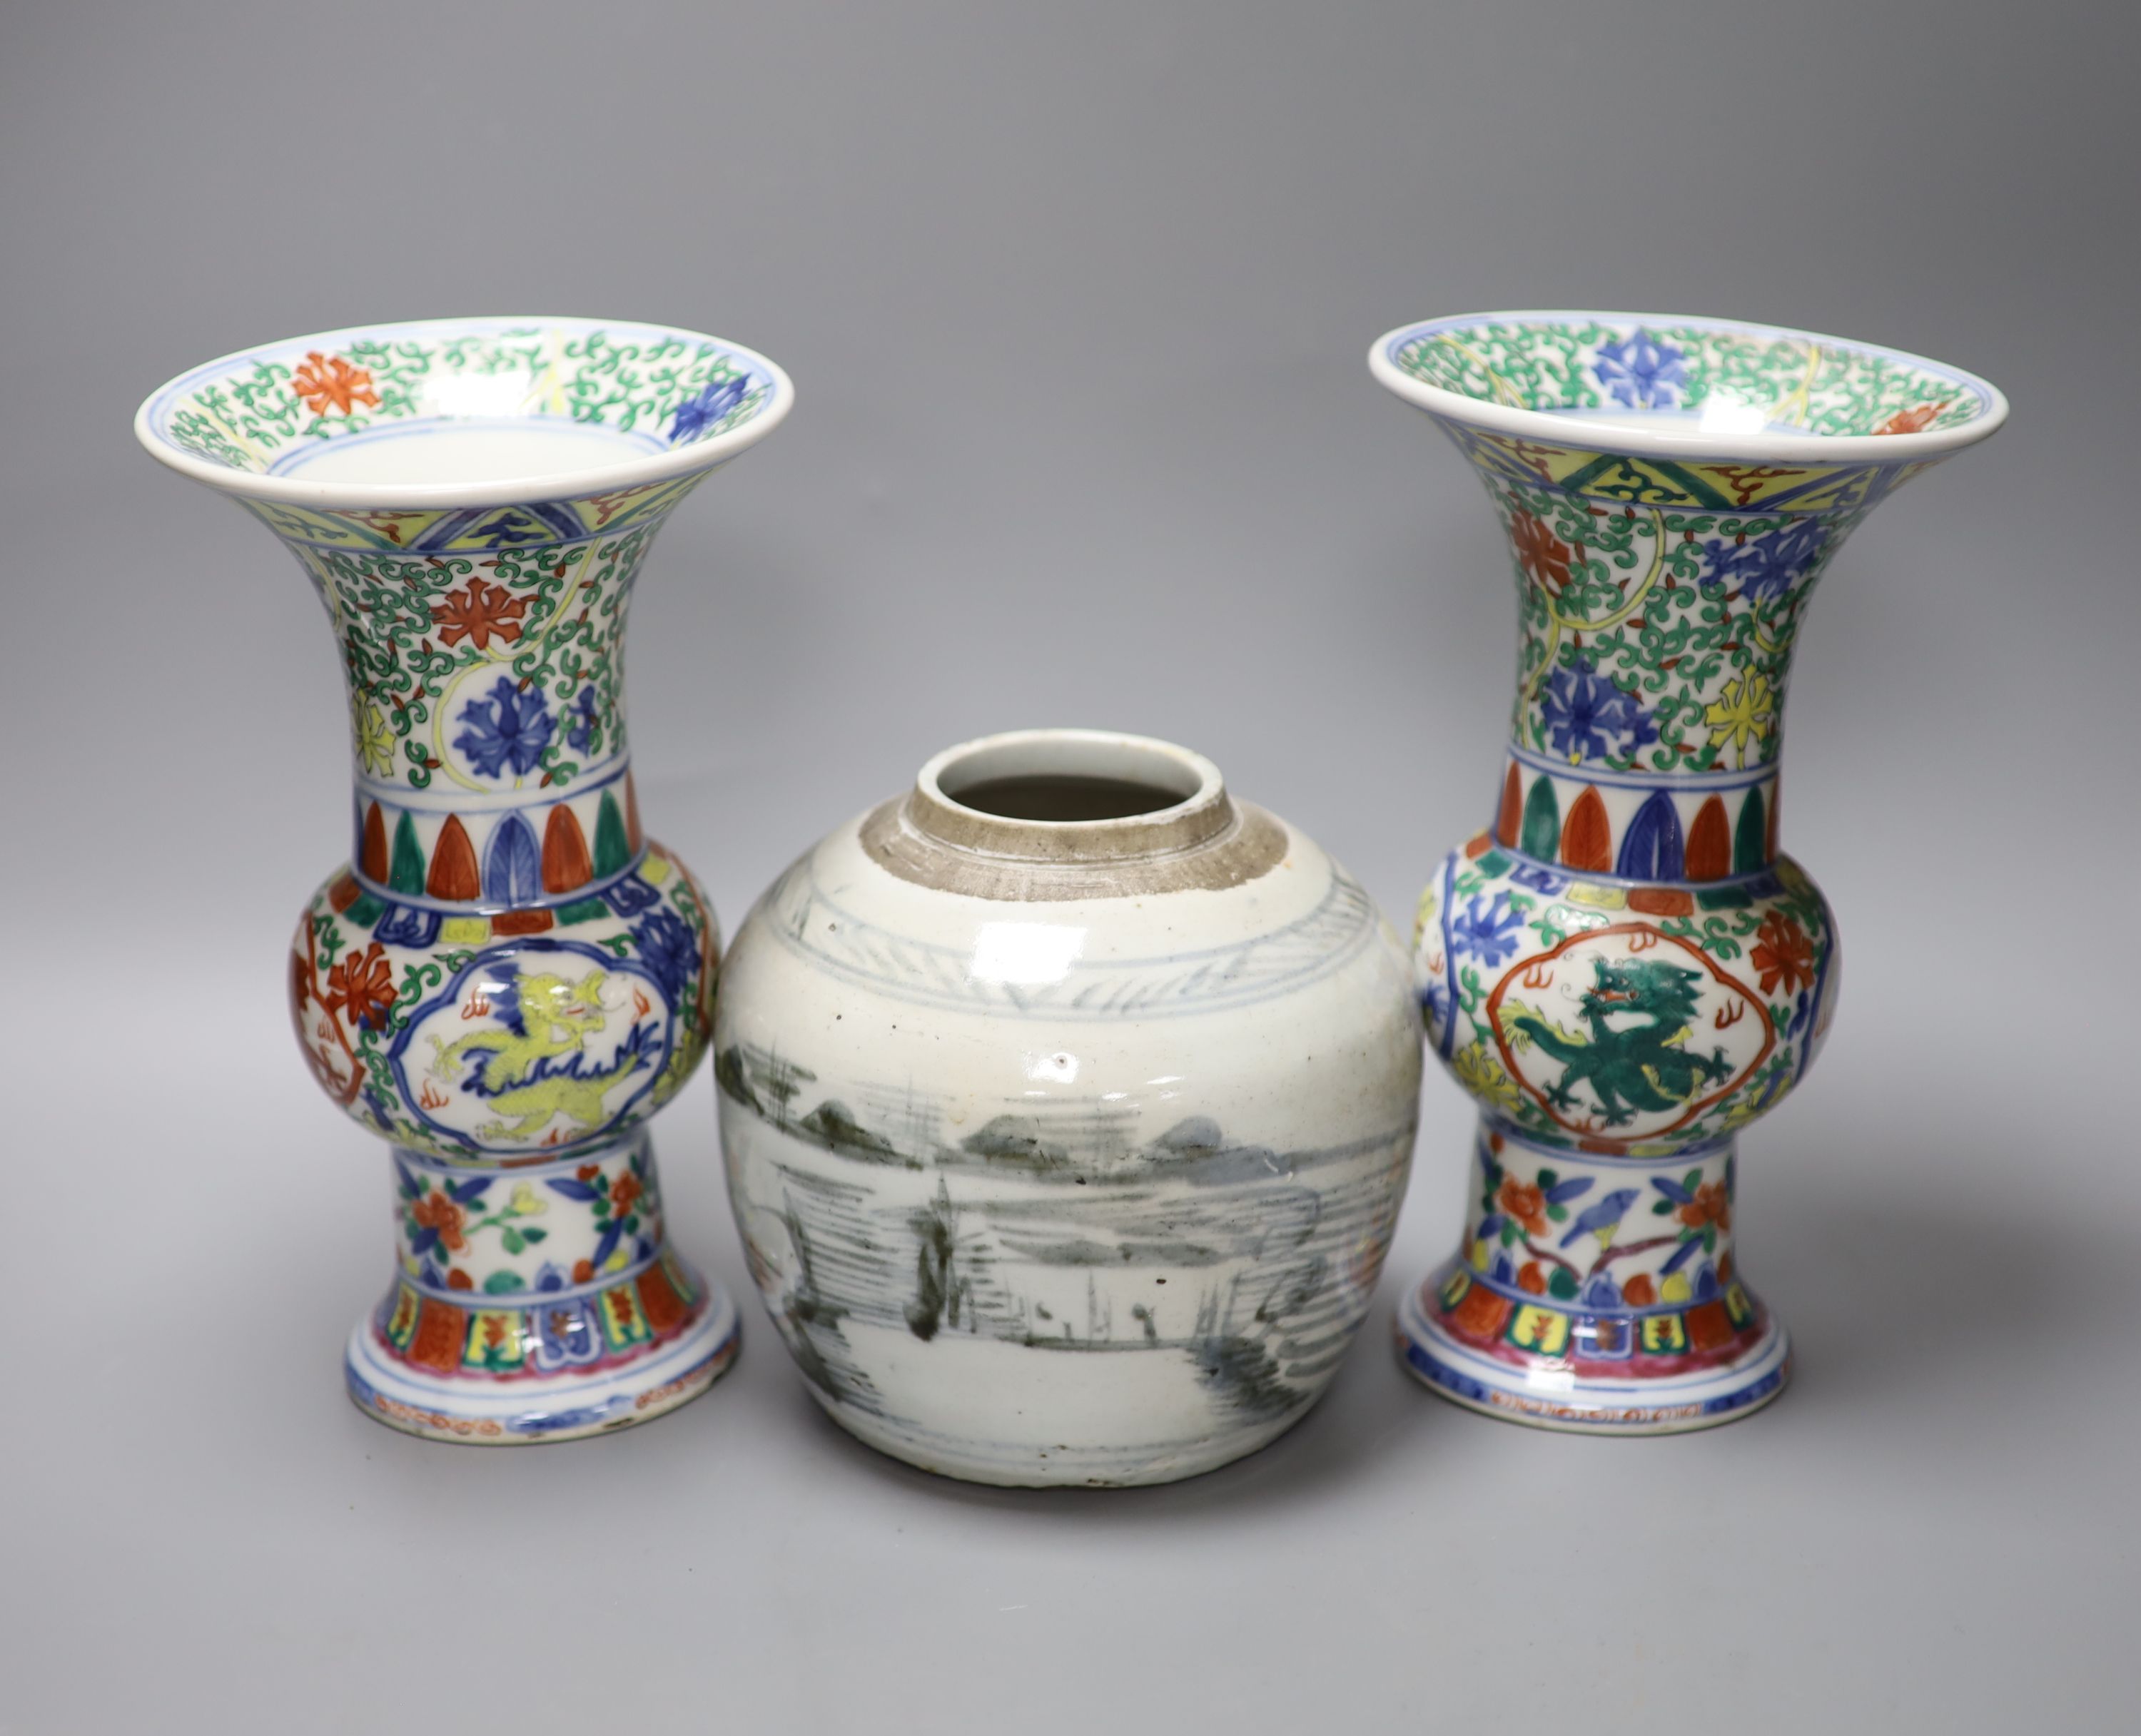 A pair of Chinese famille verte vases, height 24cm, and a jar